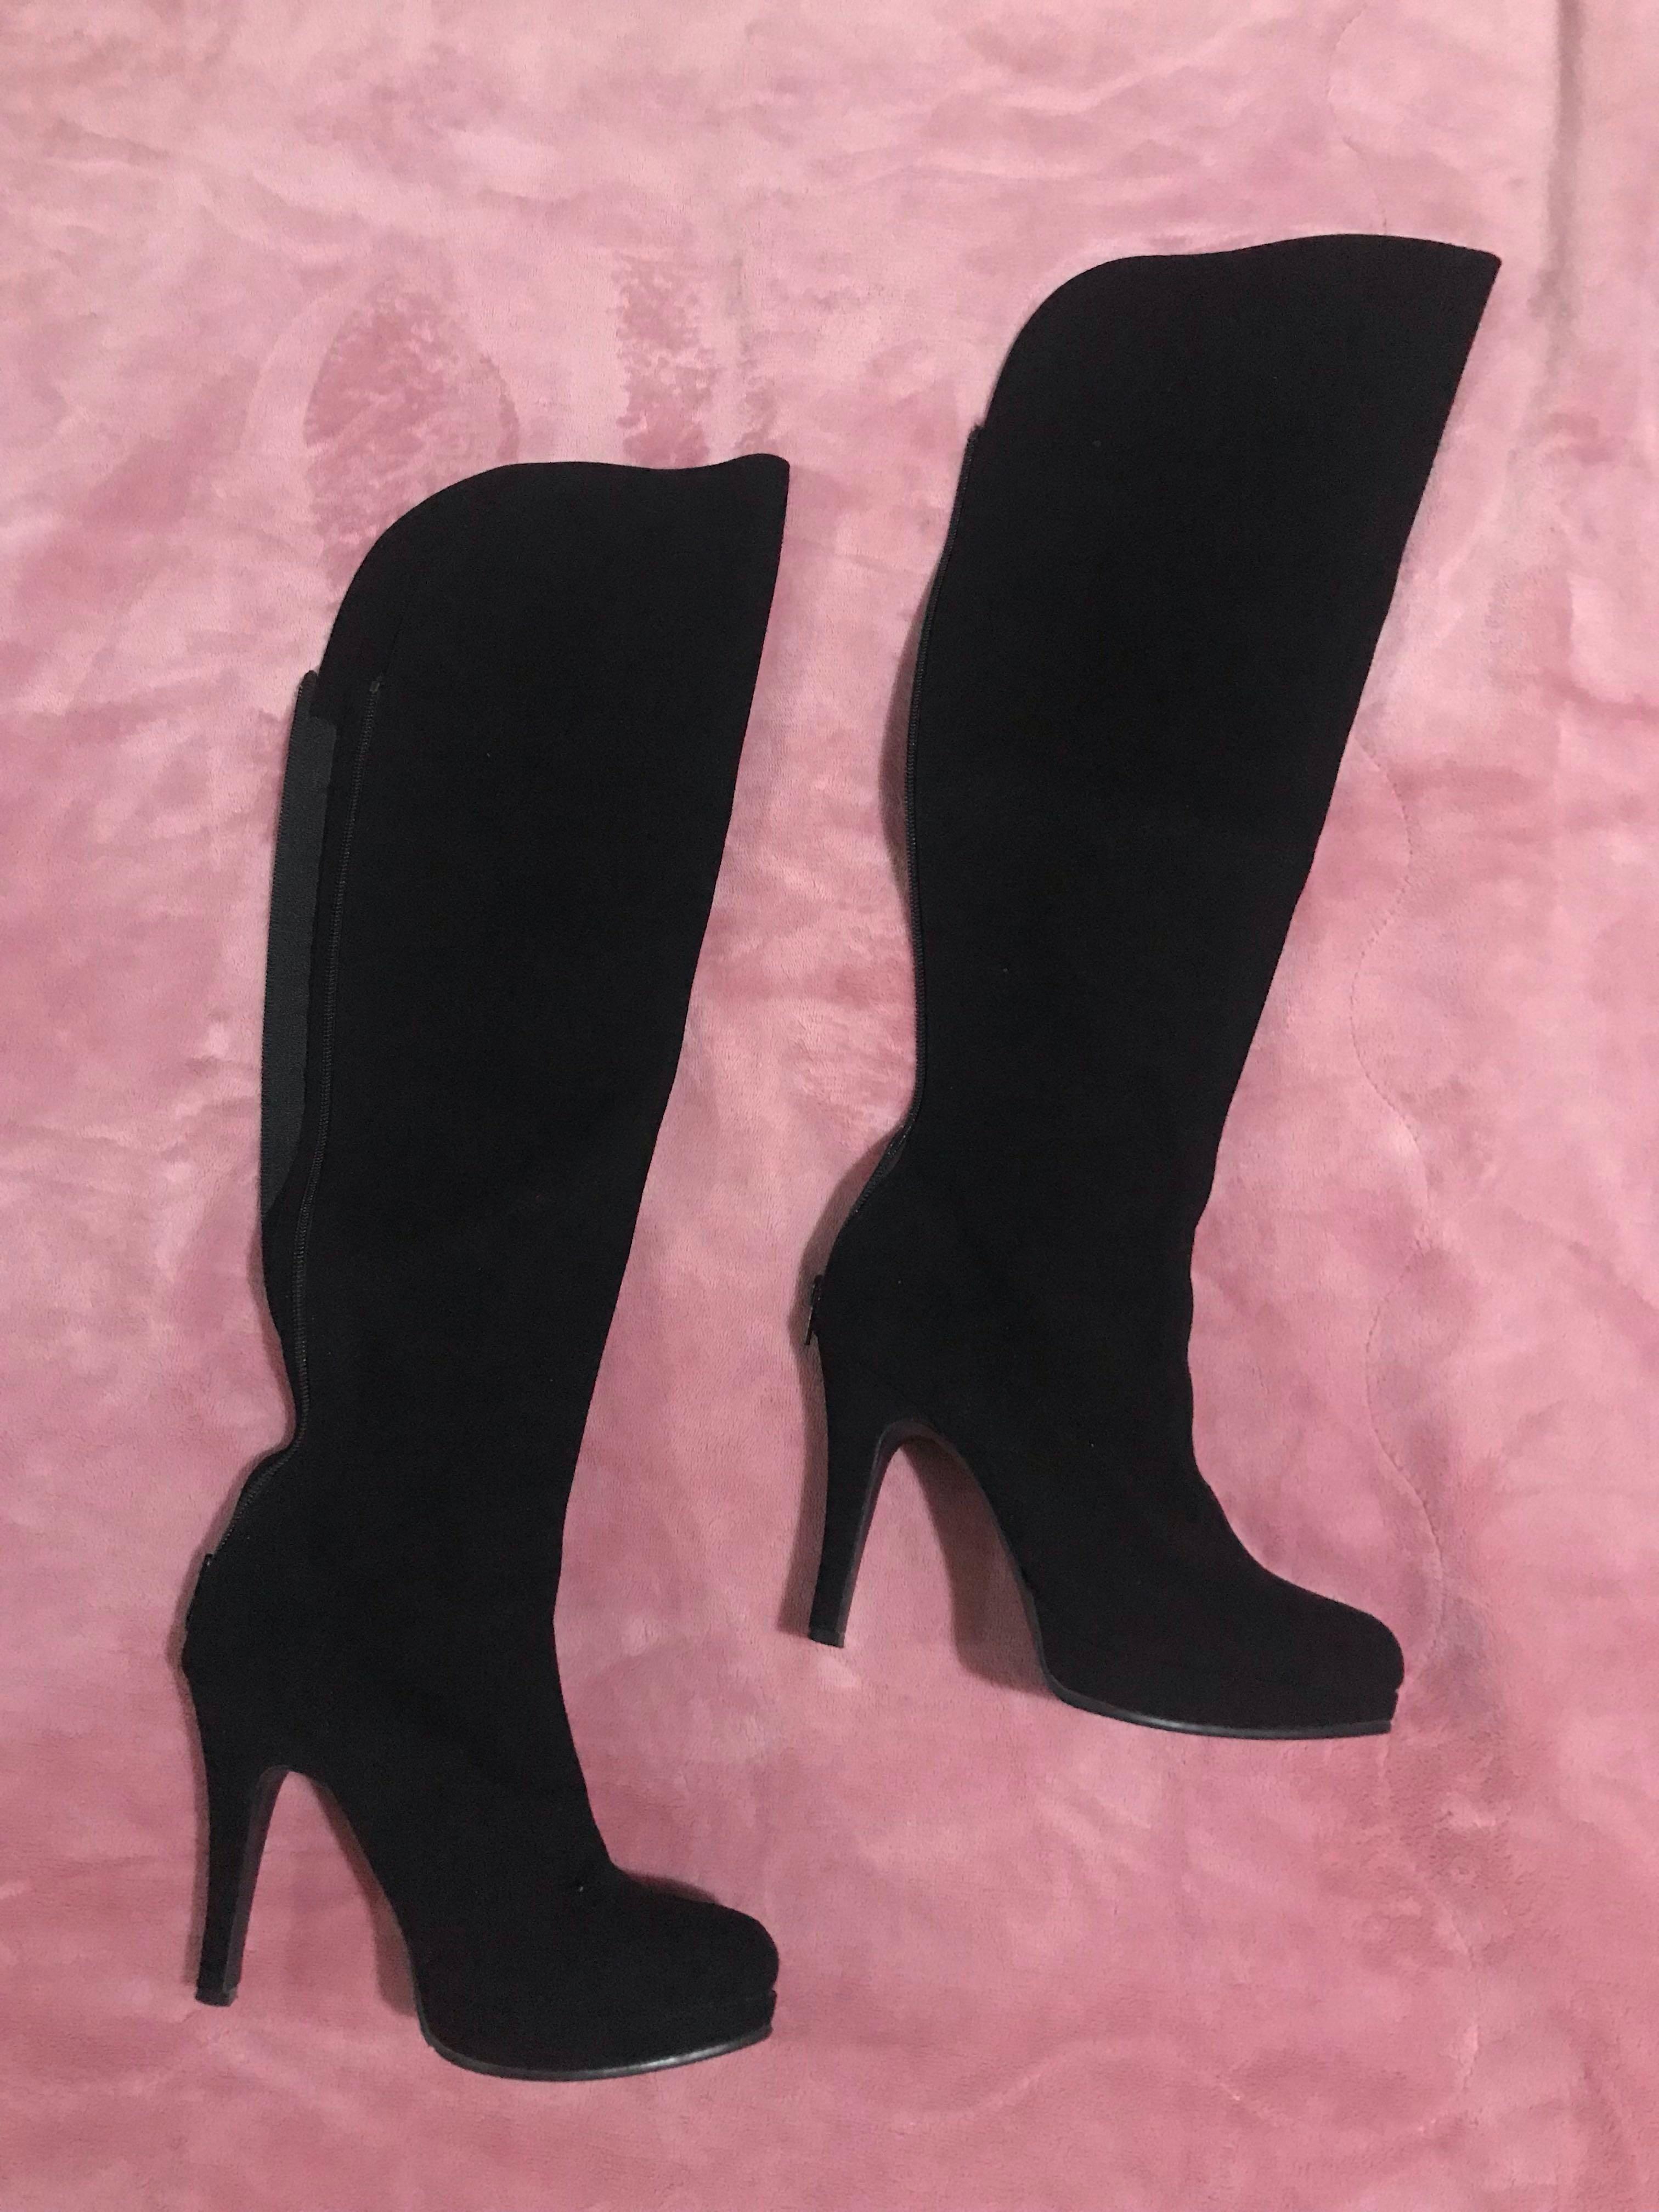 Japan Knee High Long Boots (suede cloth 